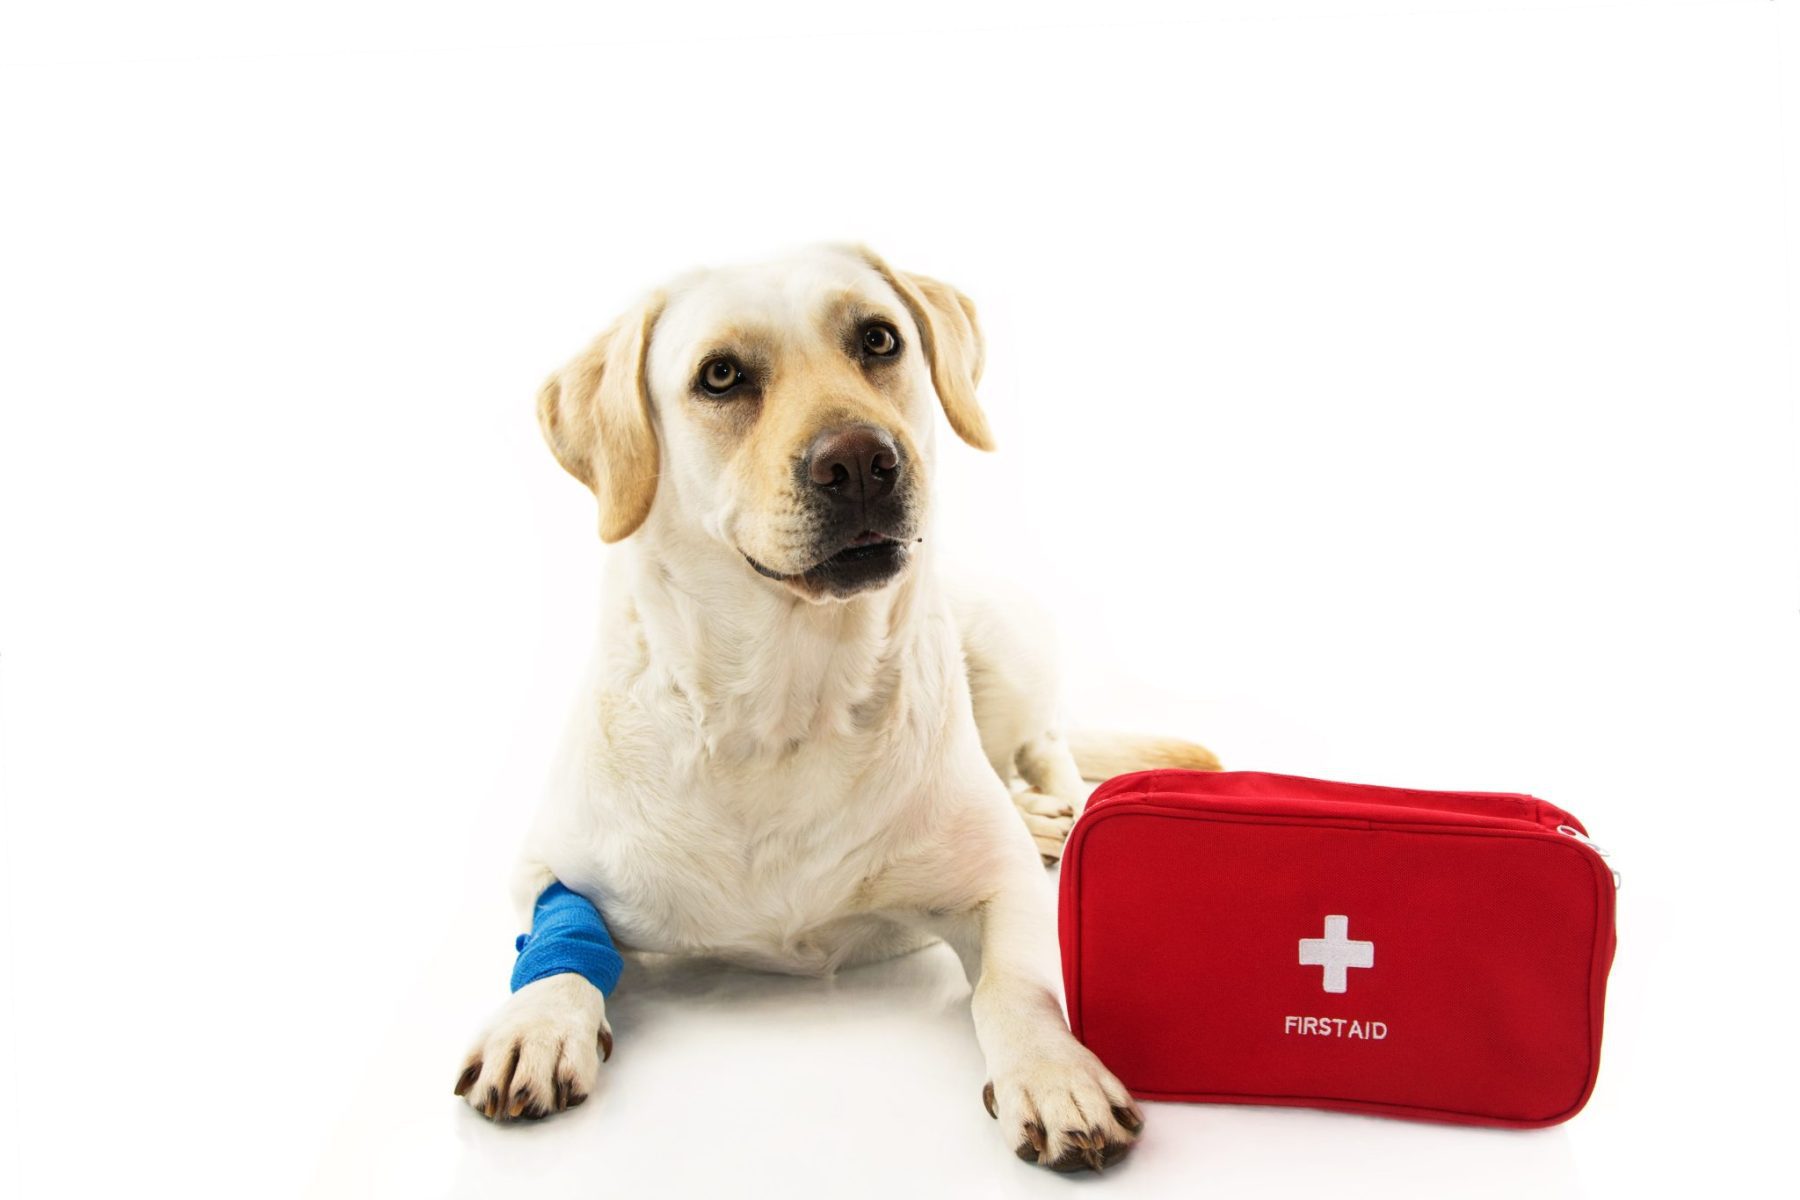 First Aid for Your Puppy